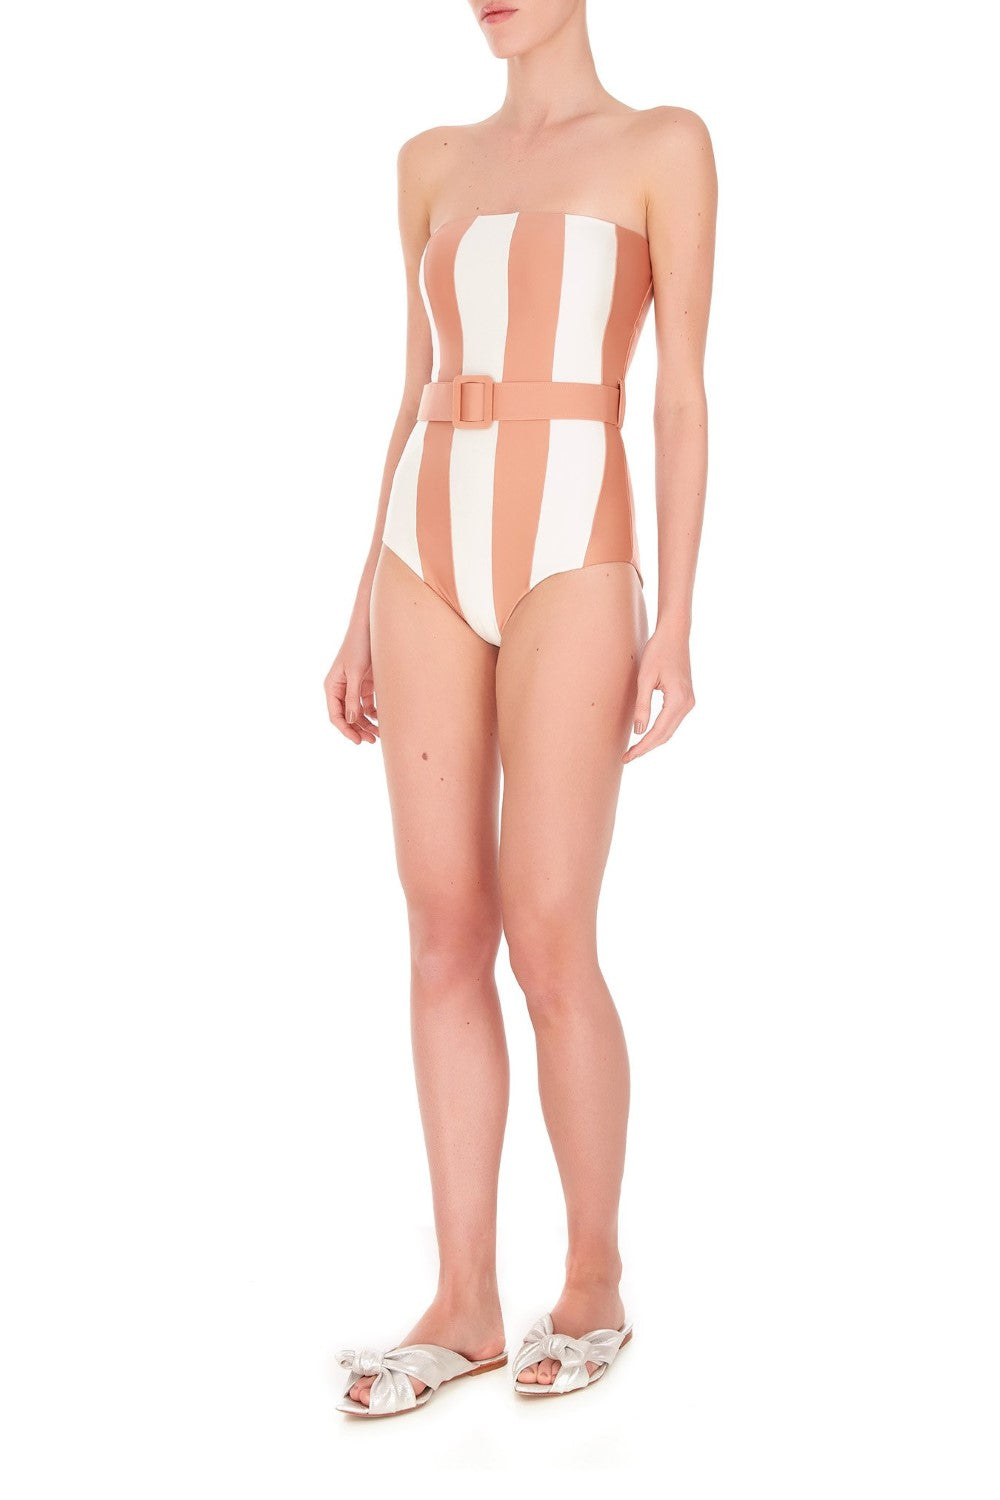 Inspired by famous movies styles like Bong girls, this strapless swimsuit has a square neckline and a belt at the waist to cinch your figure